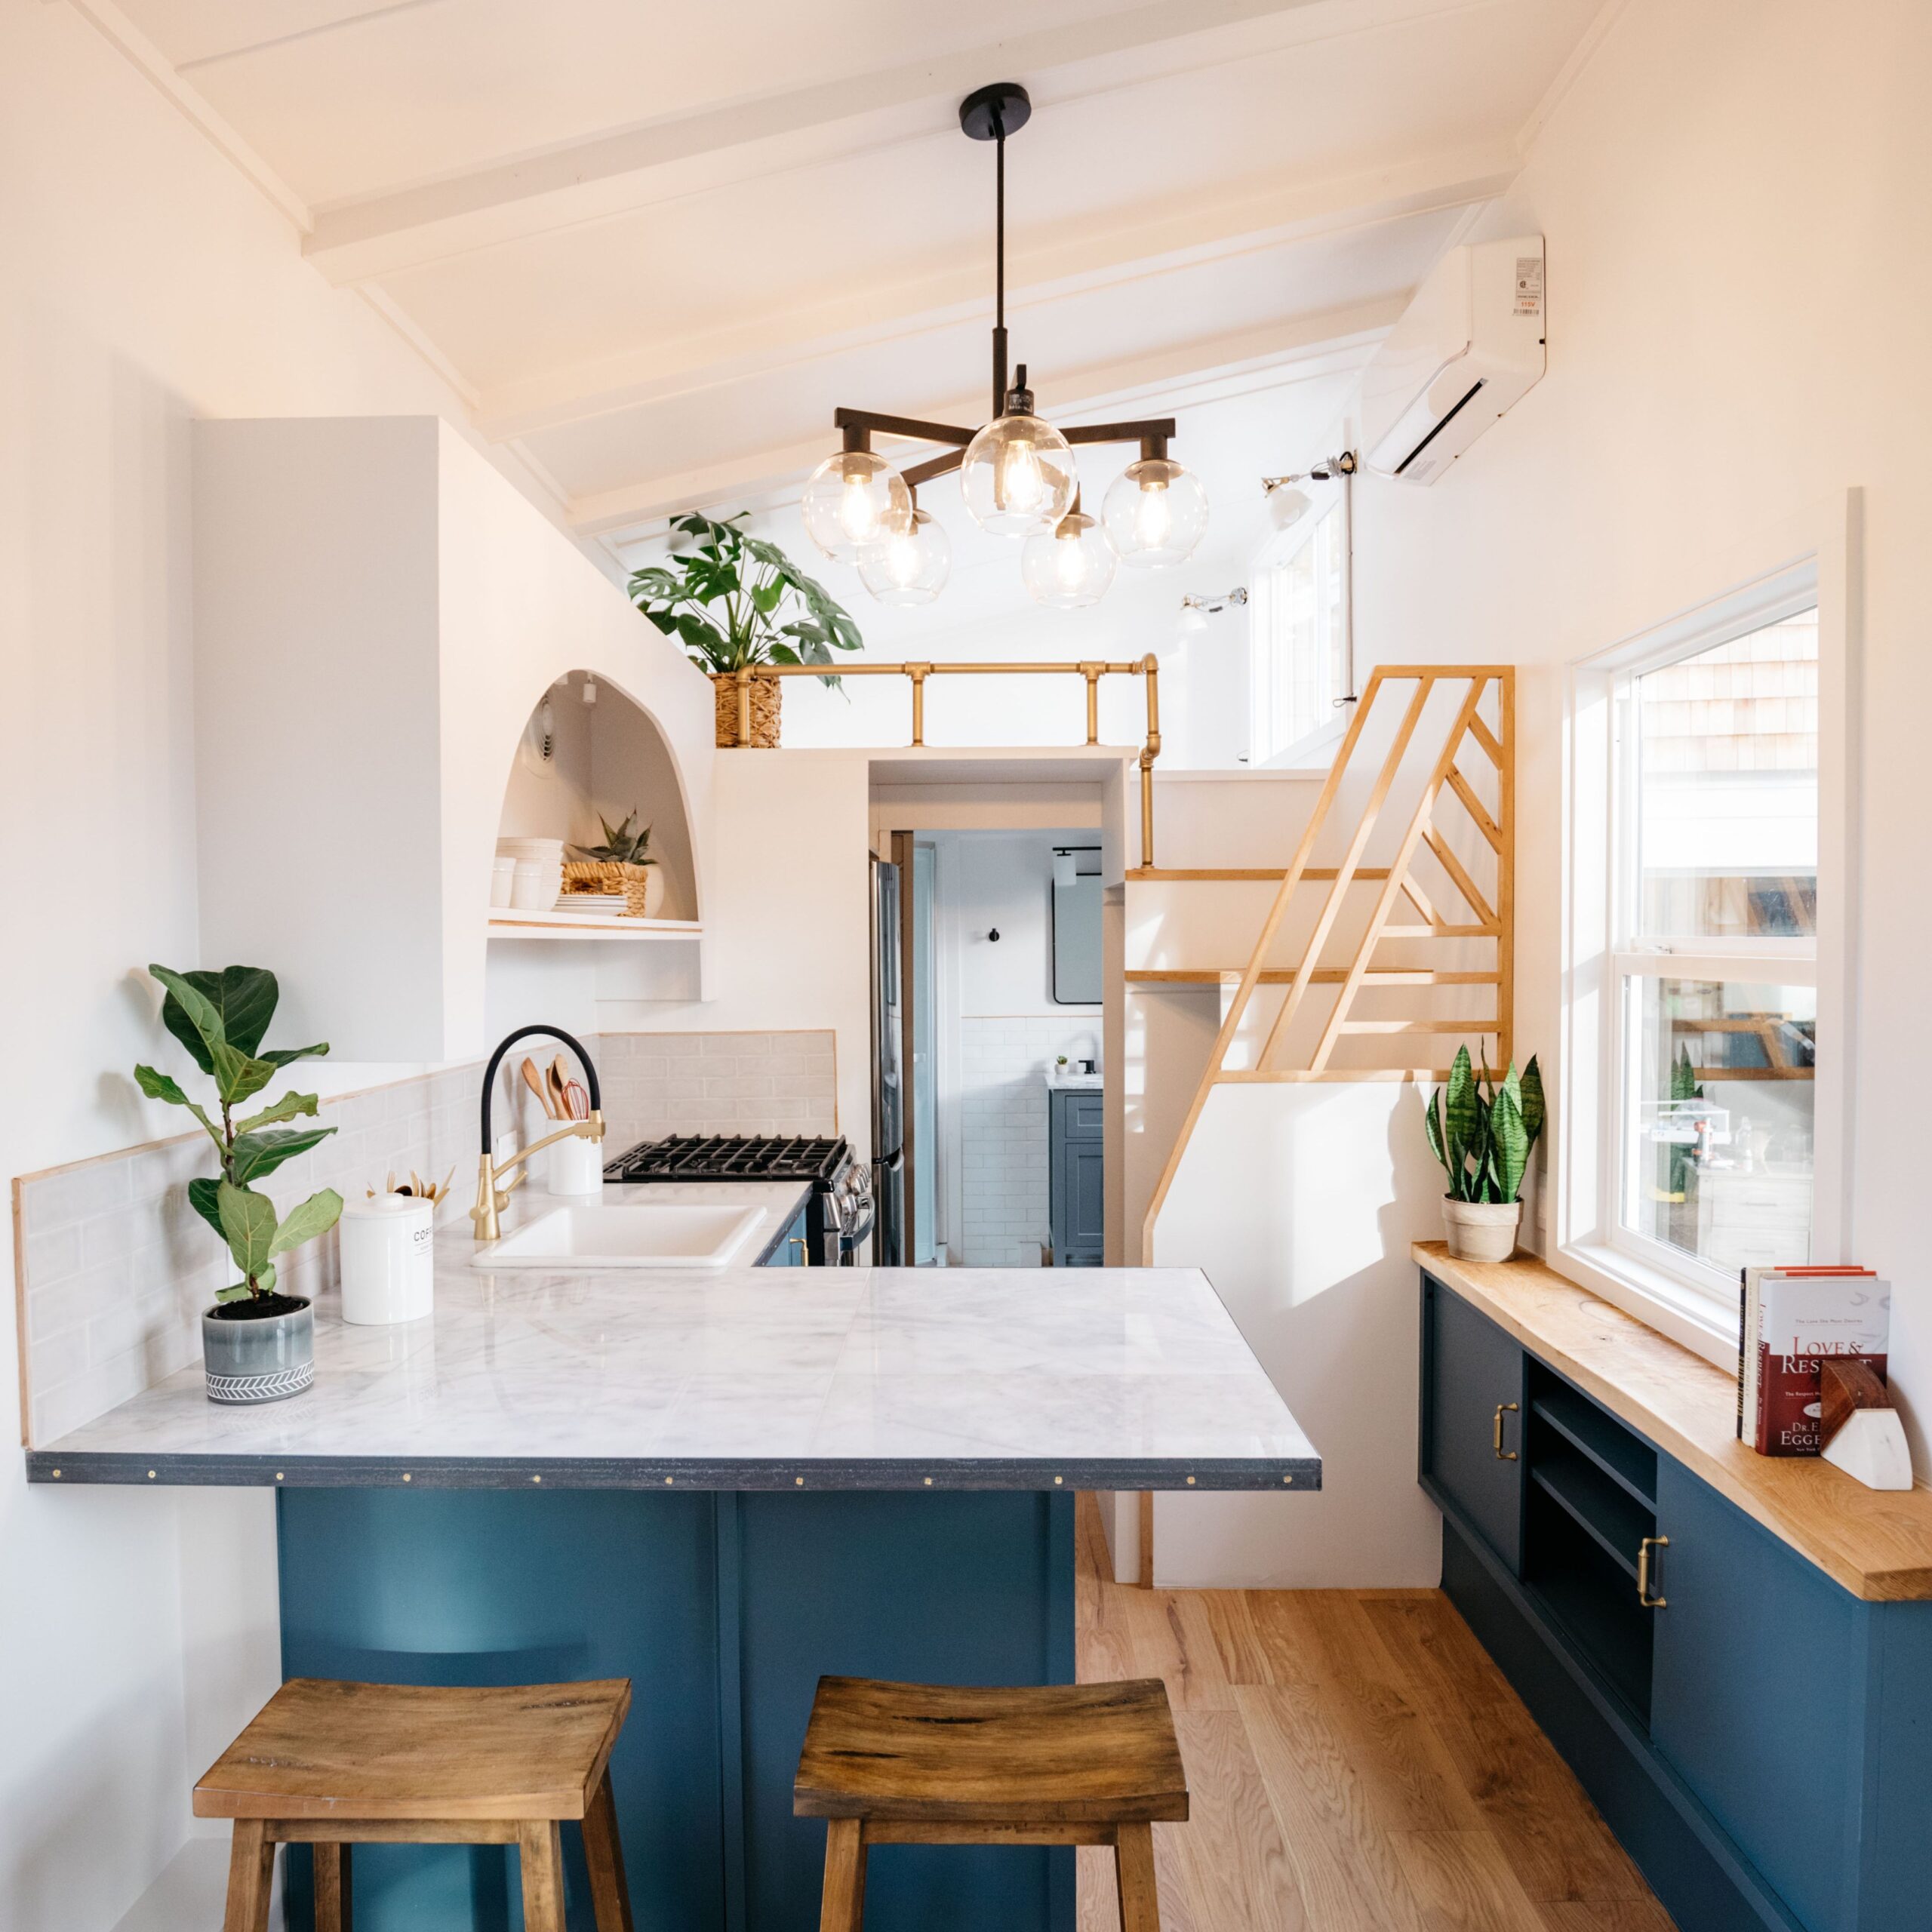 5 Tiny Home Kitchens to Inspire You - kitchens for small homes